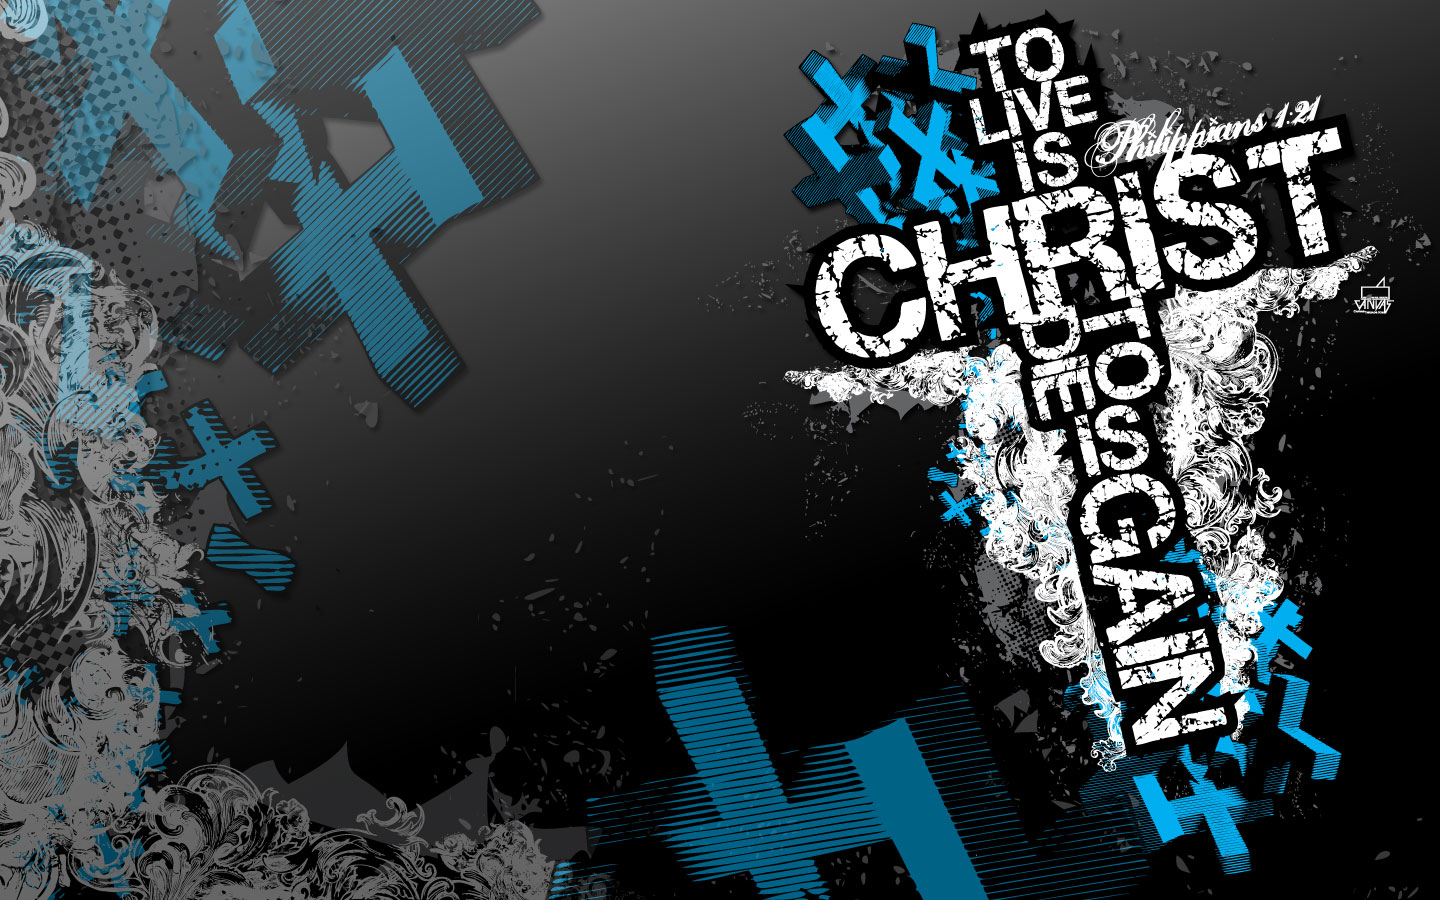    To Live is Christ Wallpaper   Christian Wallpapers and Backgrounds